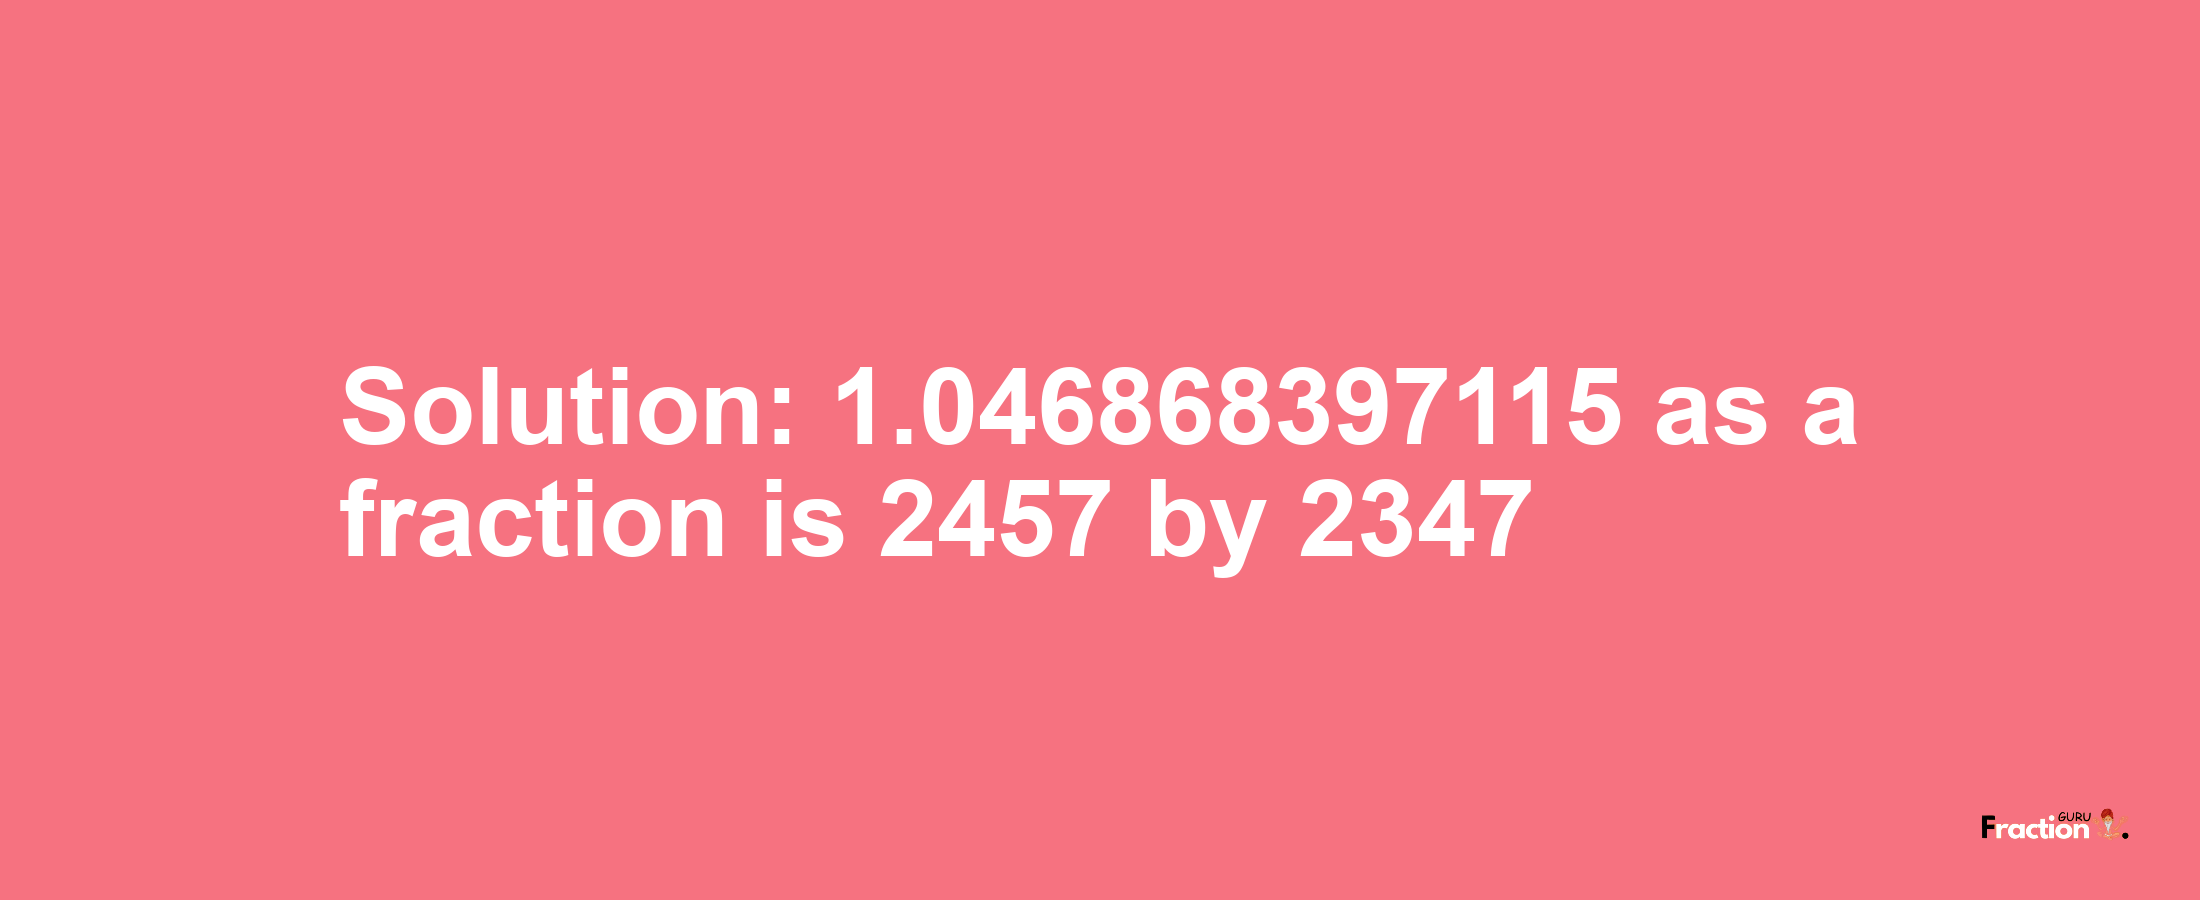 Solution:1.046868397115 as a fraction is 2457/2347